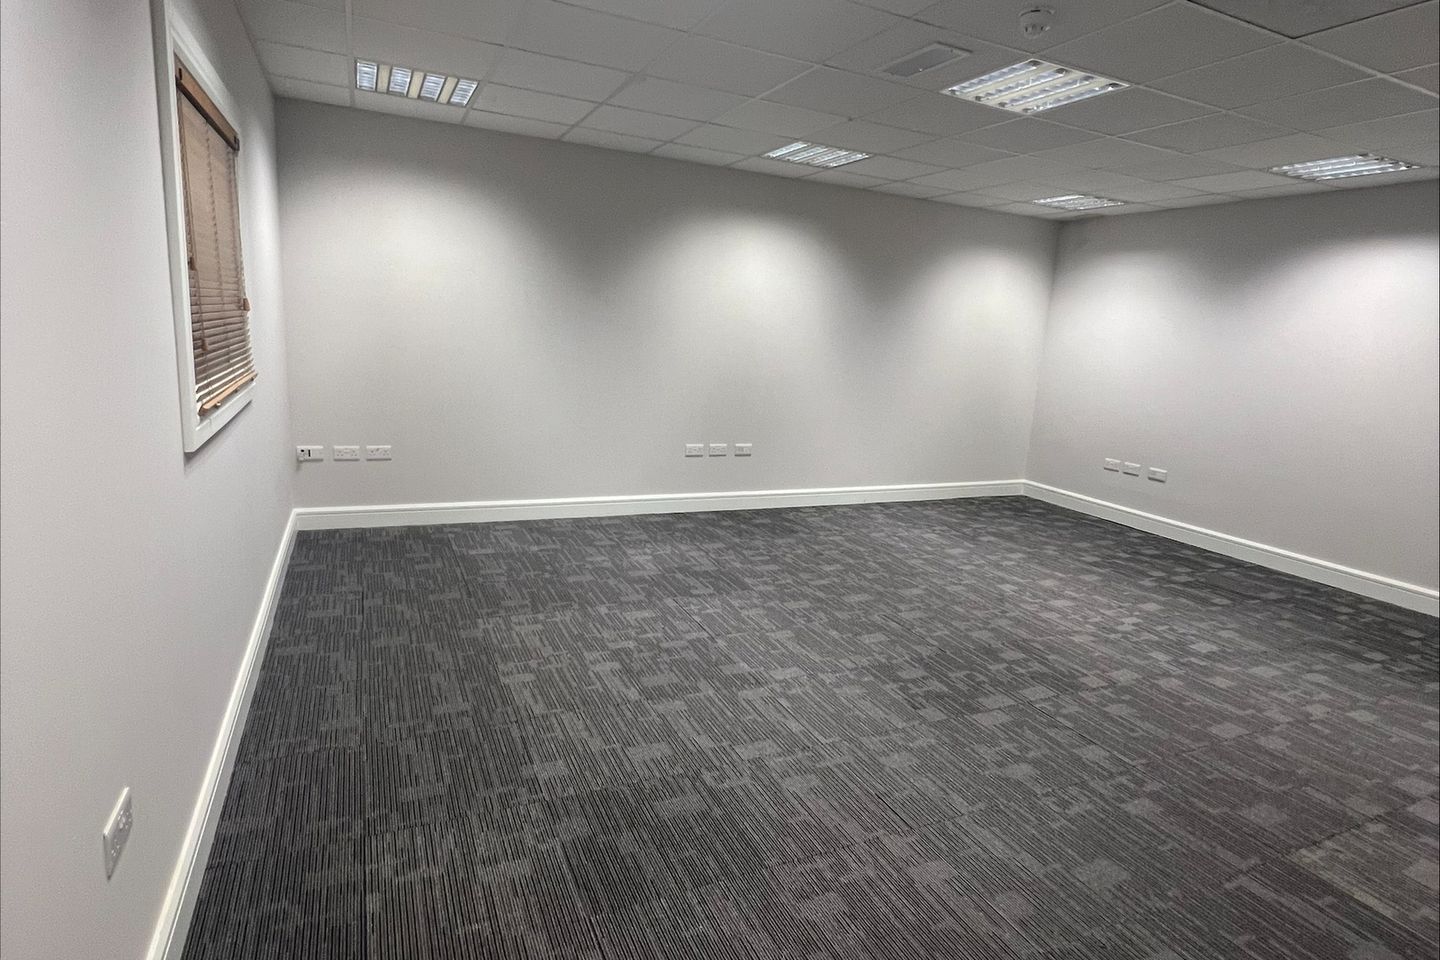 Office 3, Unit 24, Claregalway Corporate Park, Claregalway, Co. Galway